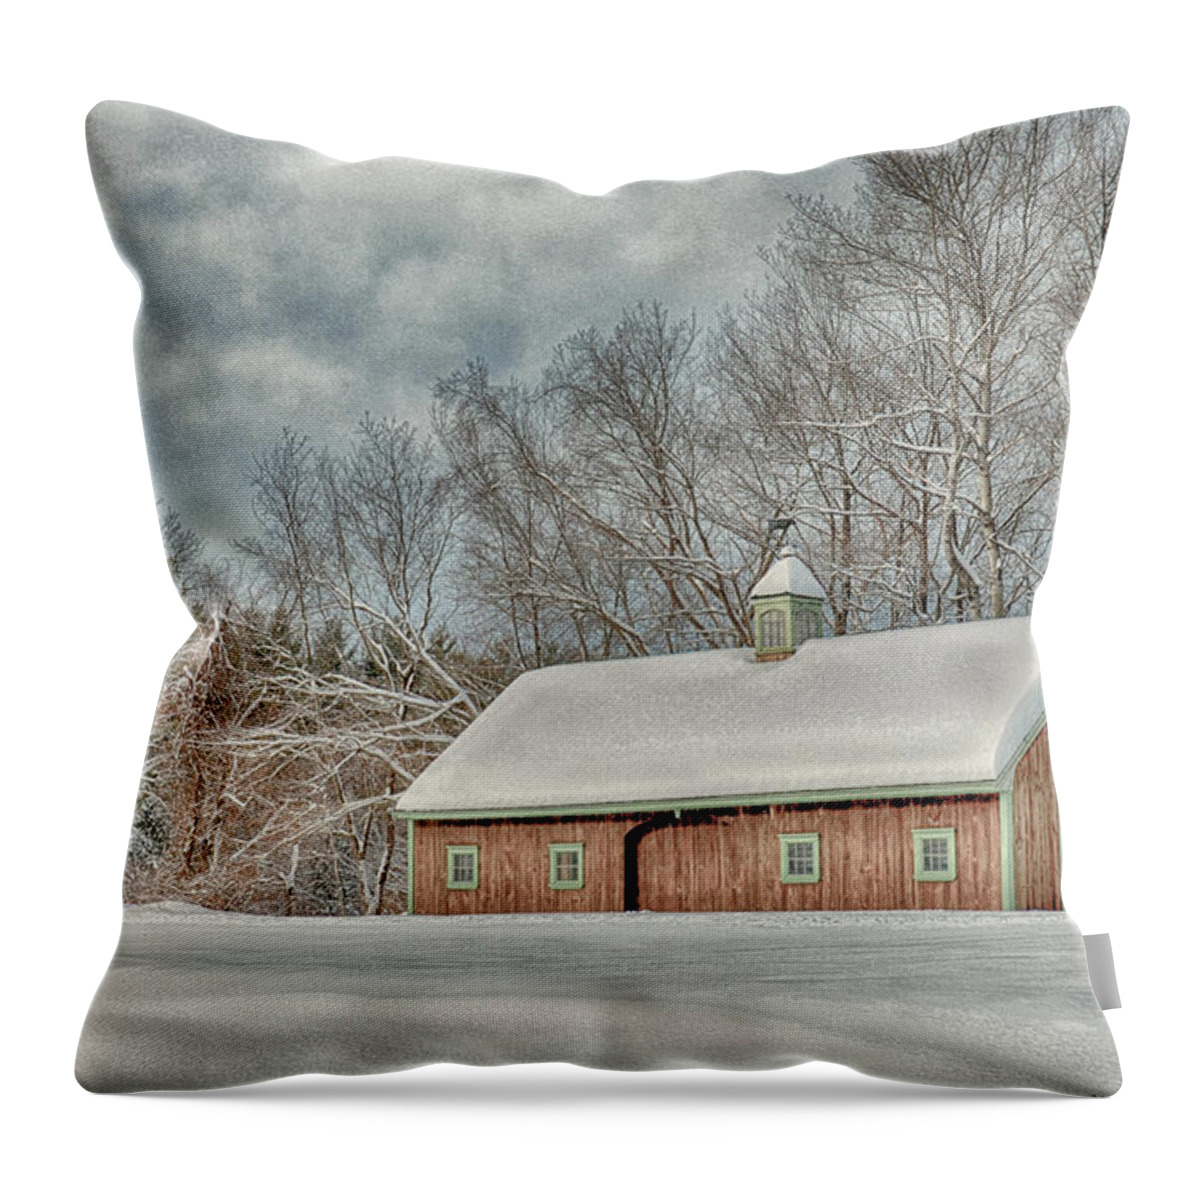 Blue Throw Pillow featuring the photograph Winters Coming by Tricia Marchlik